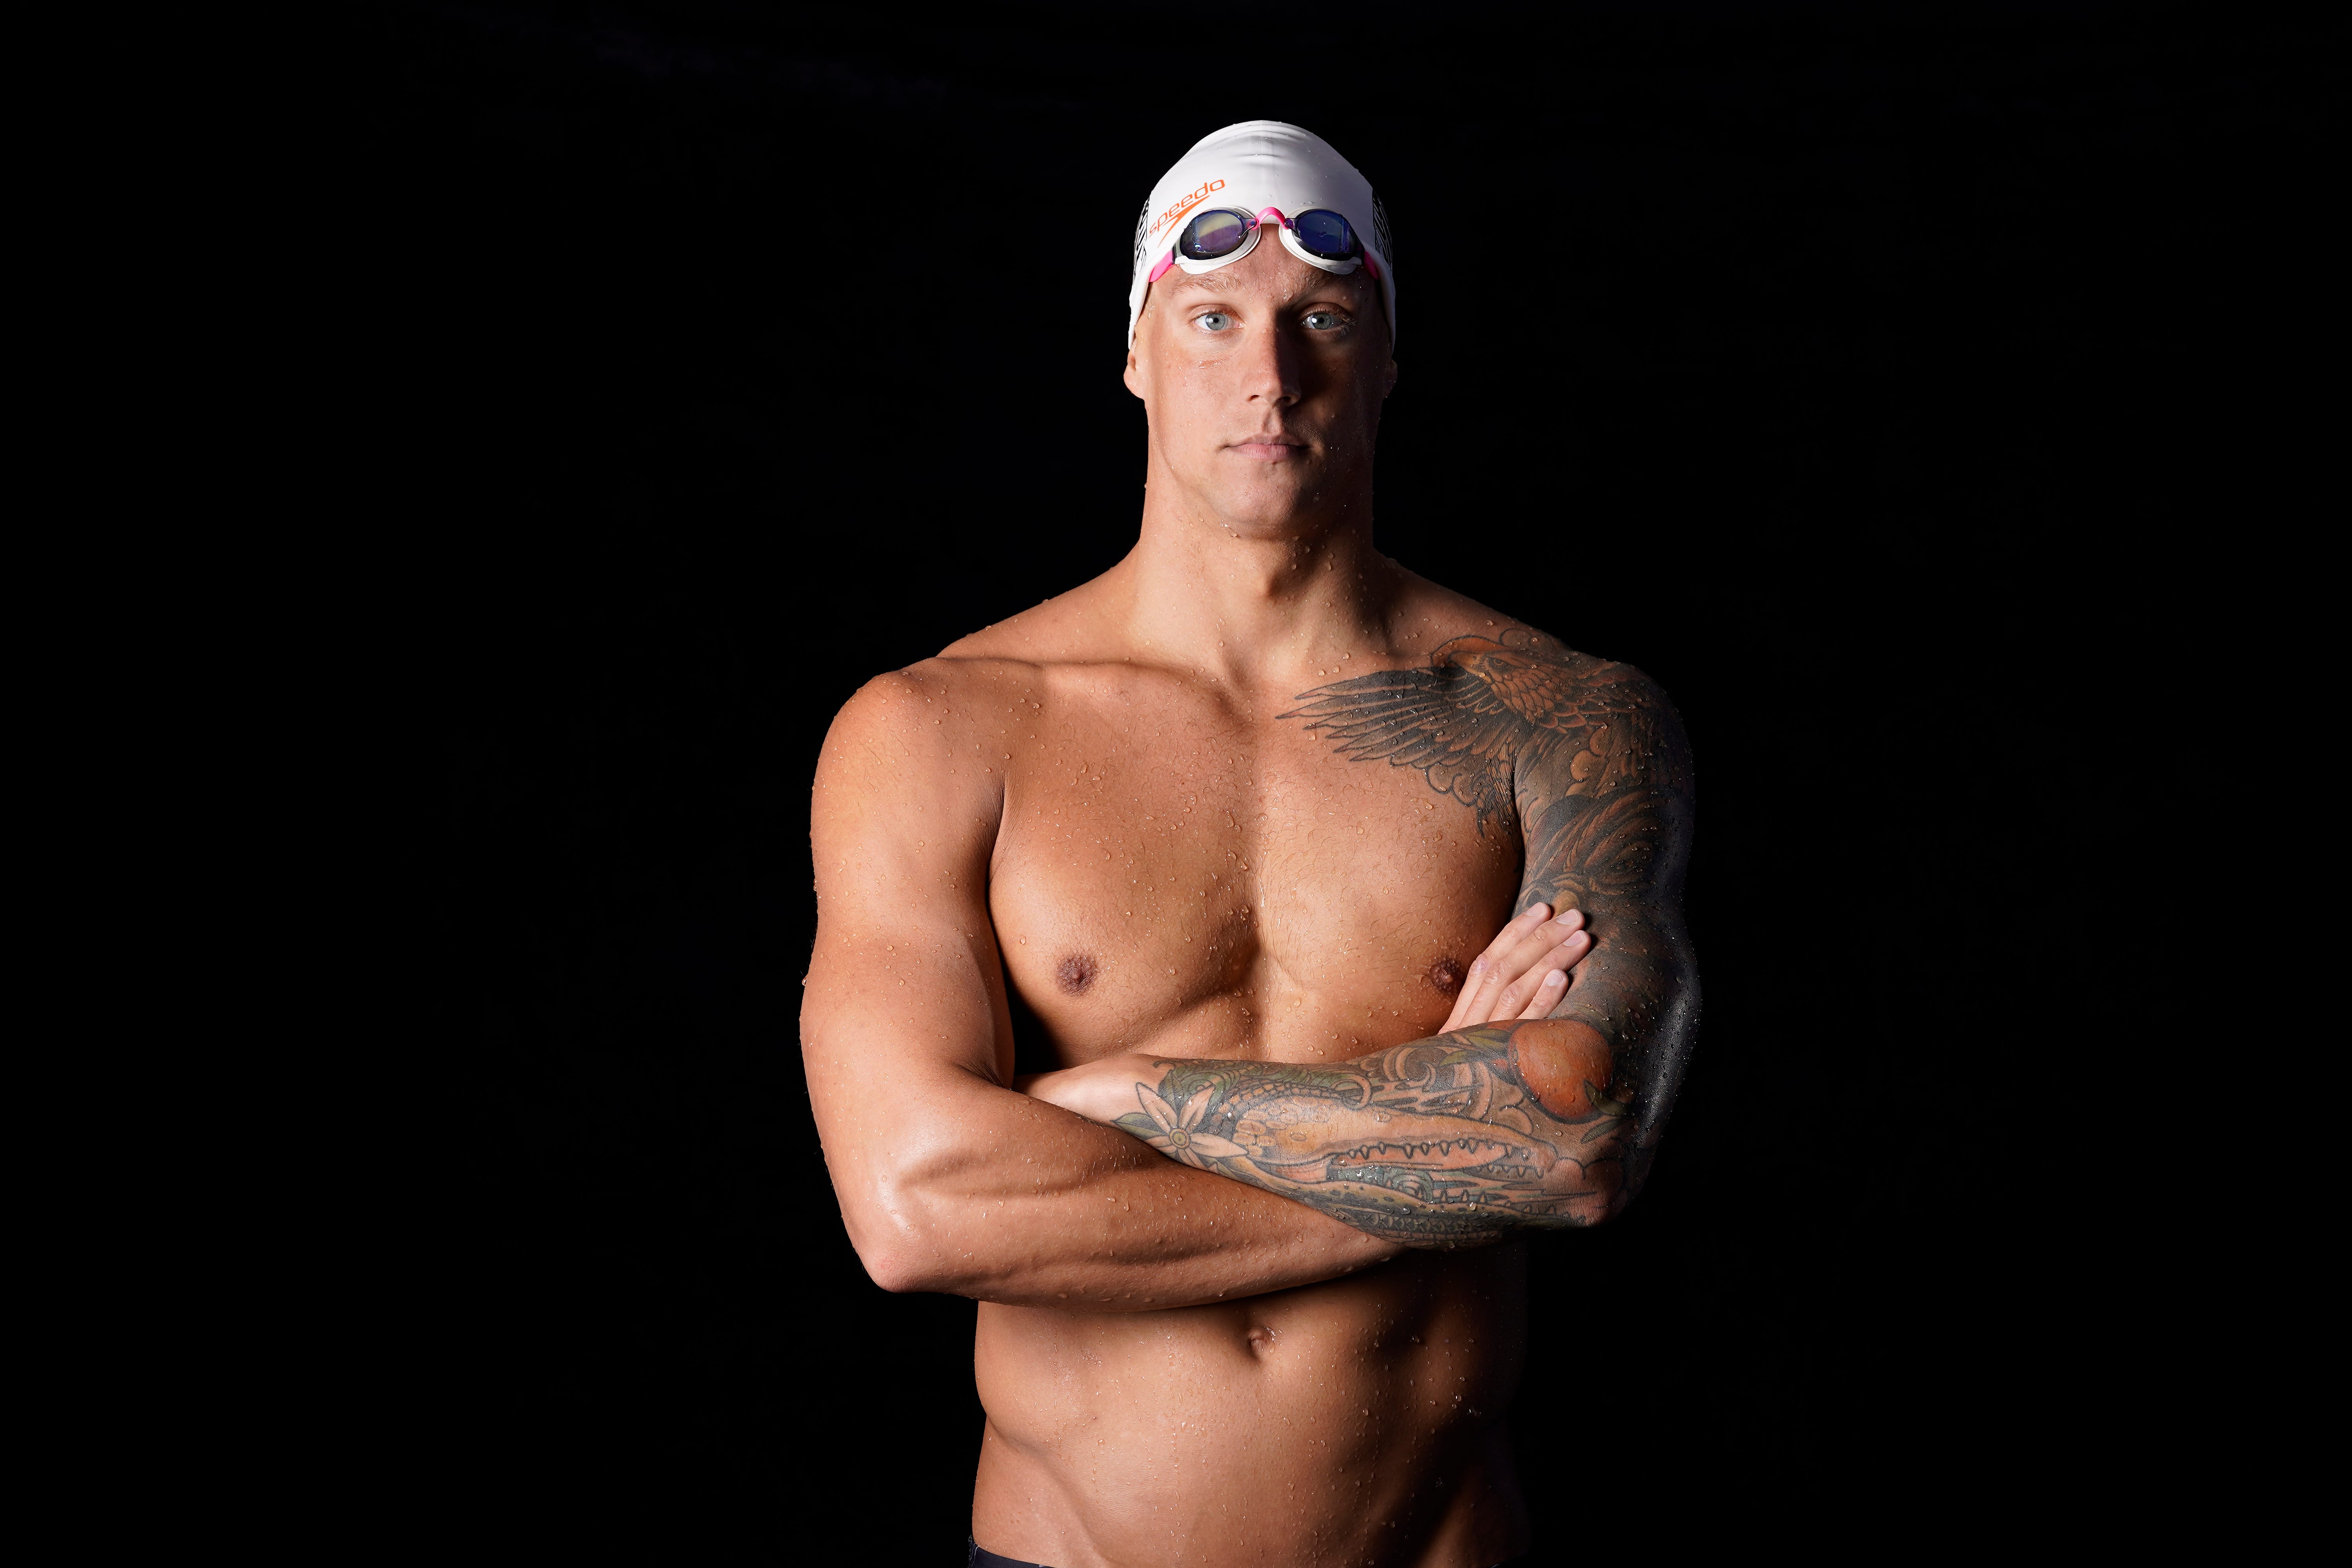 Dressel poses for a photo in April 2021.